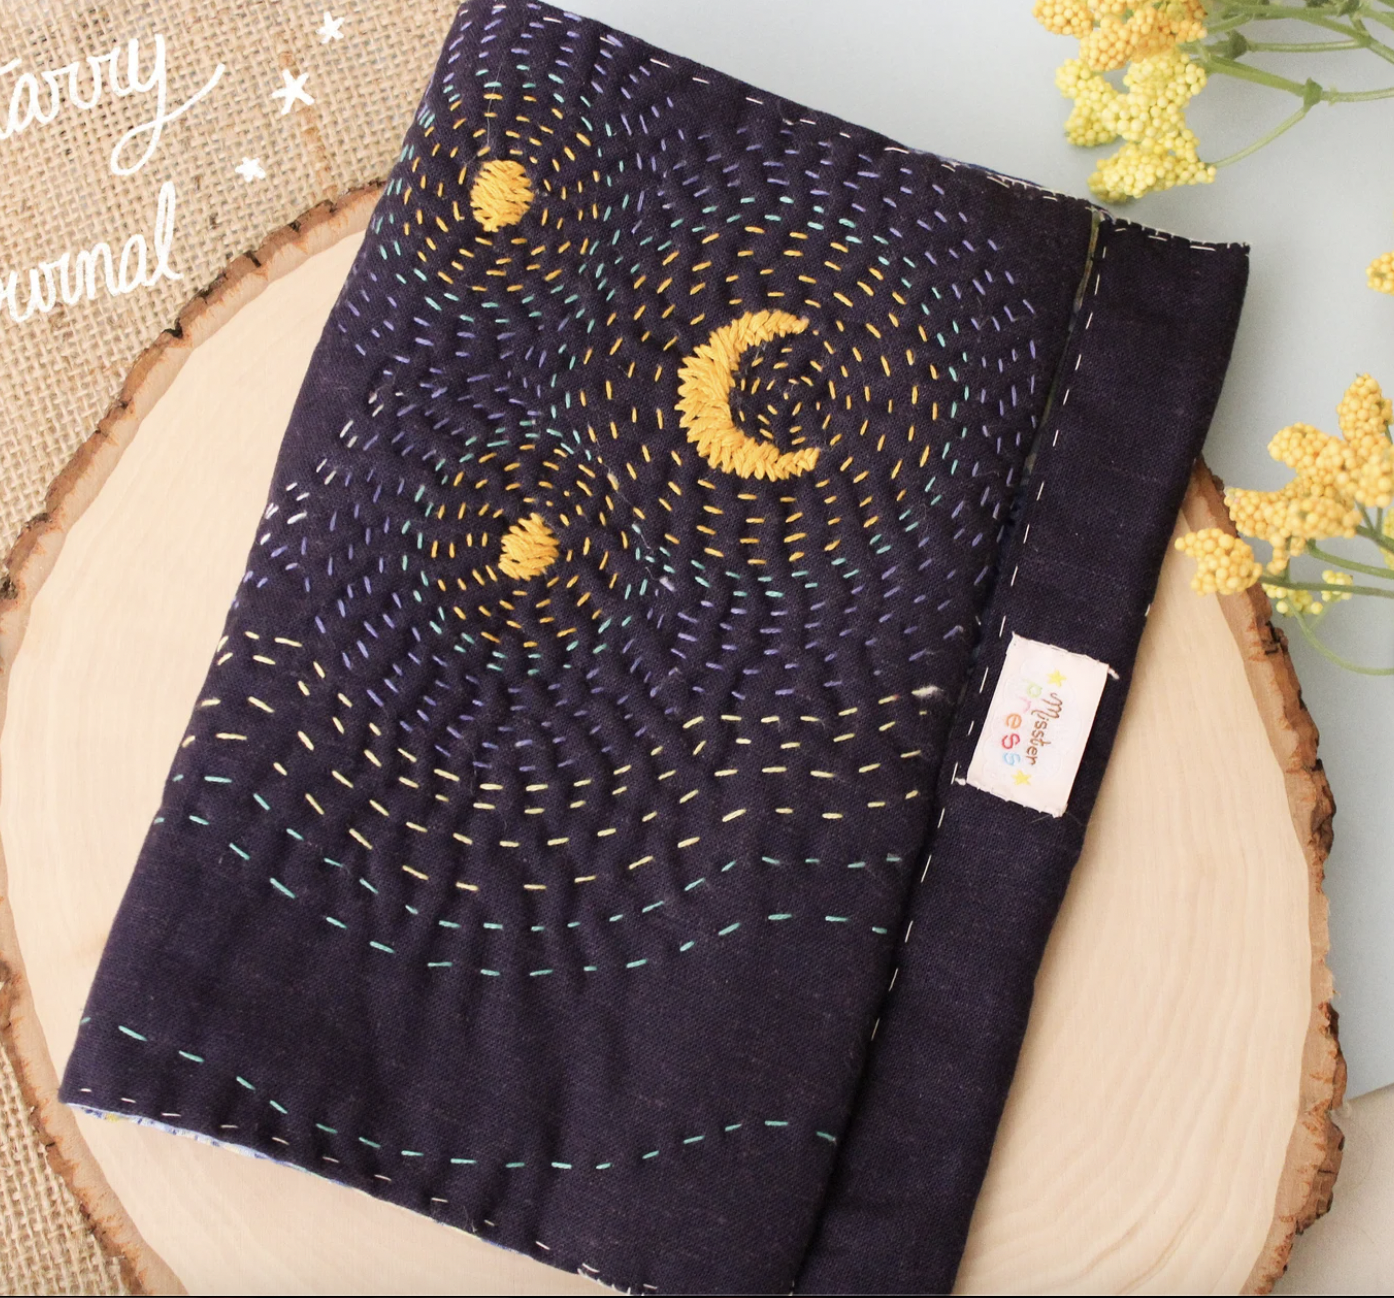 Image of a dark blue fabric book cover embroidered with stars and a crescent moon